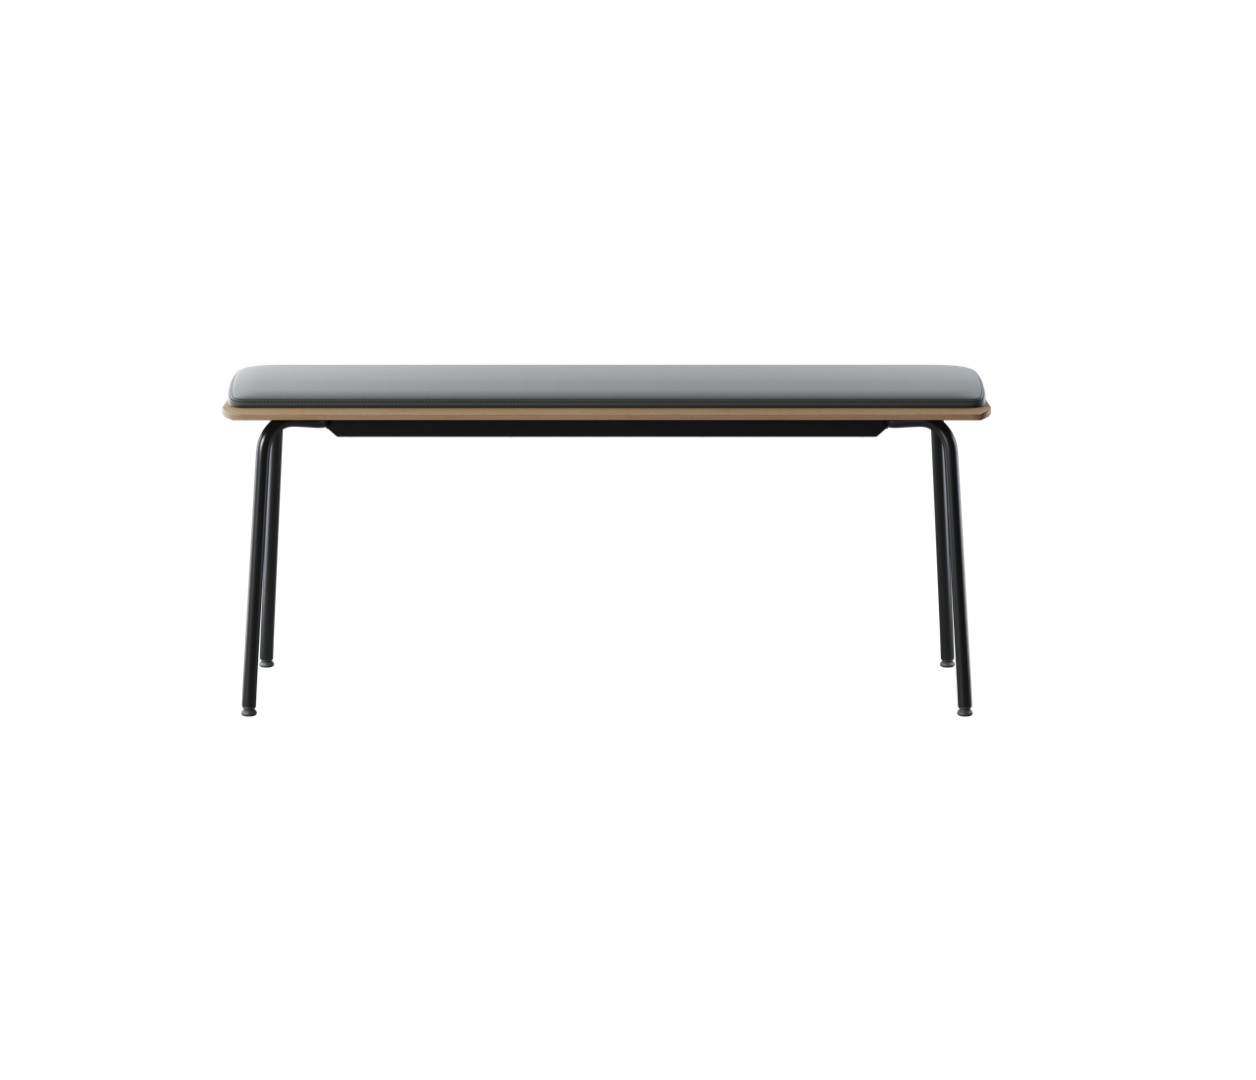 OCEE&FOUR – Stools & Benches – Share Bench – Packshot Image(3) Large